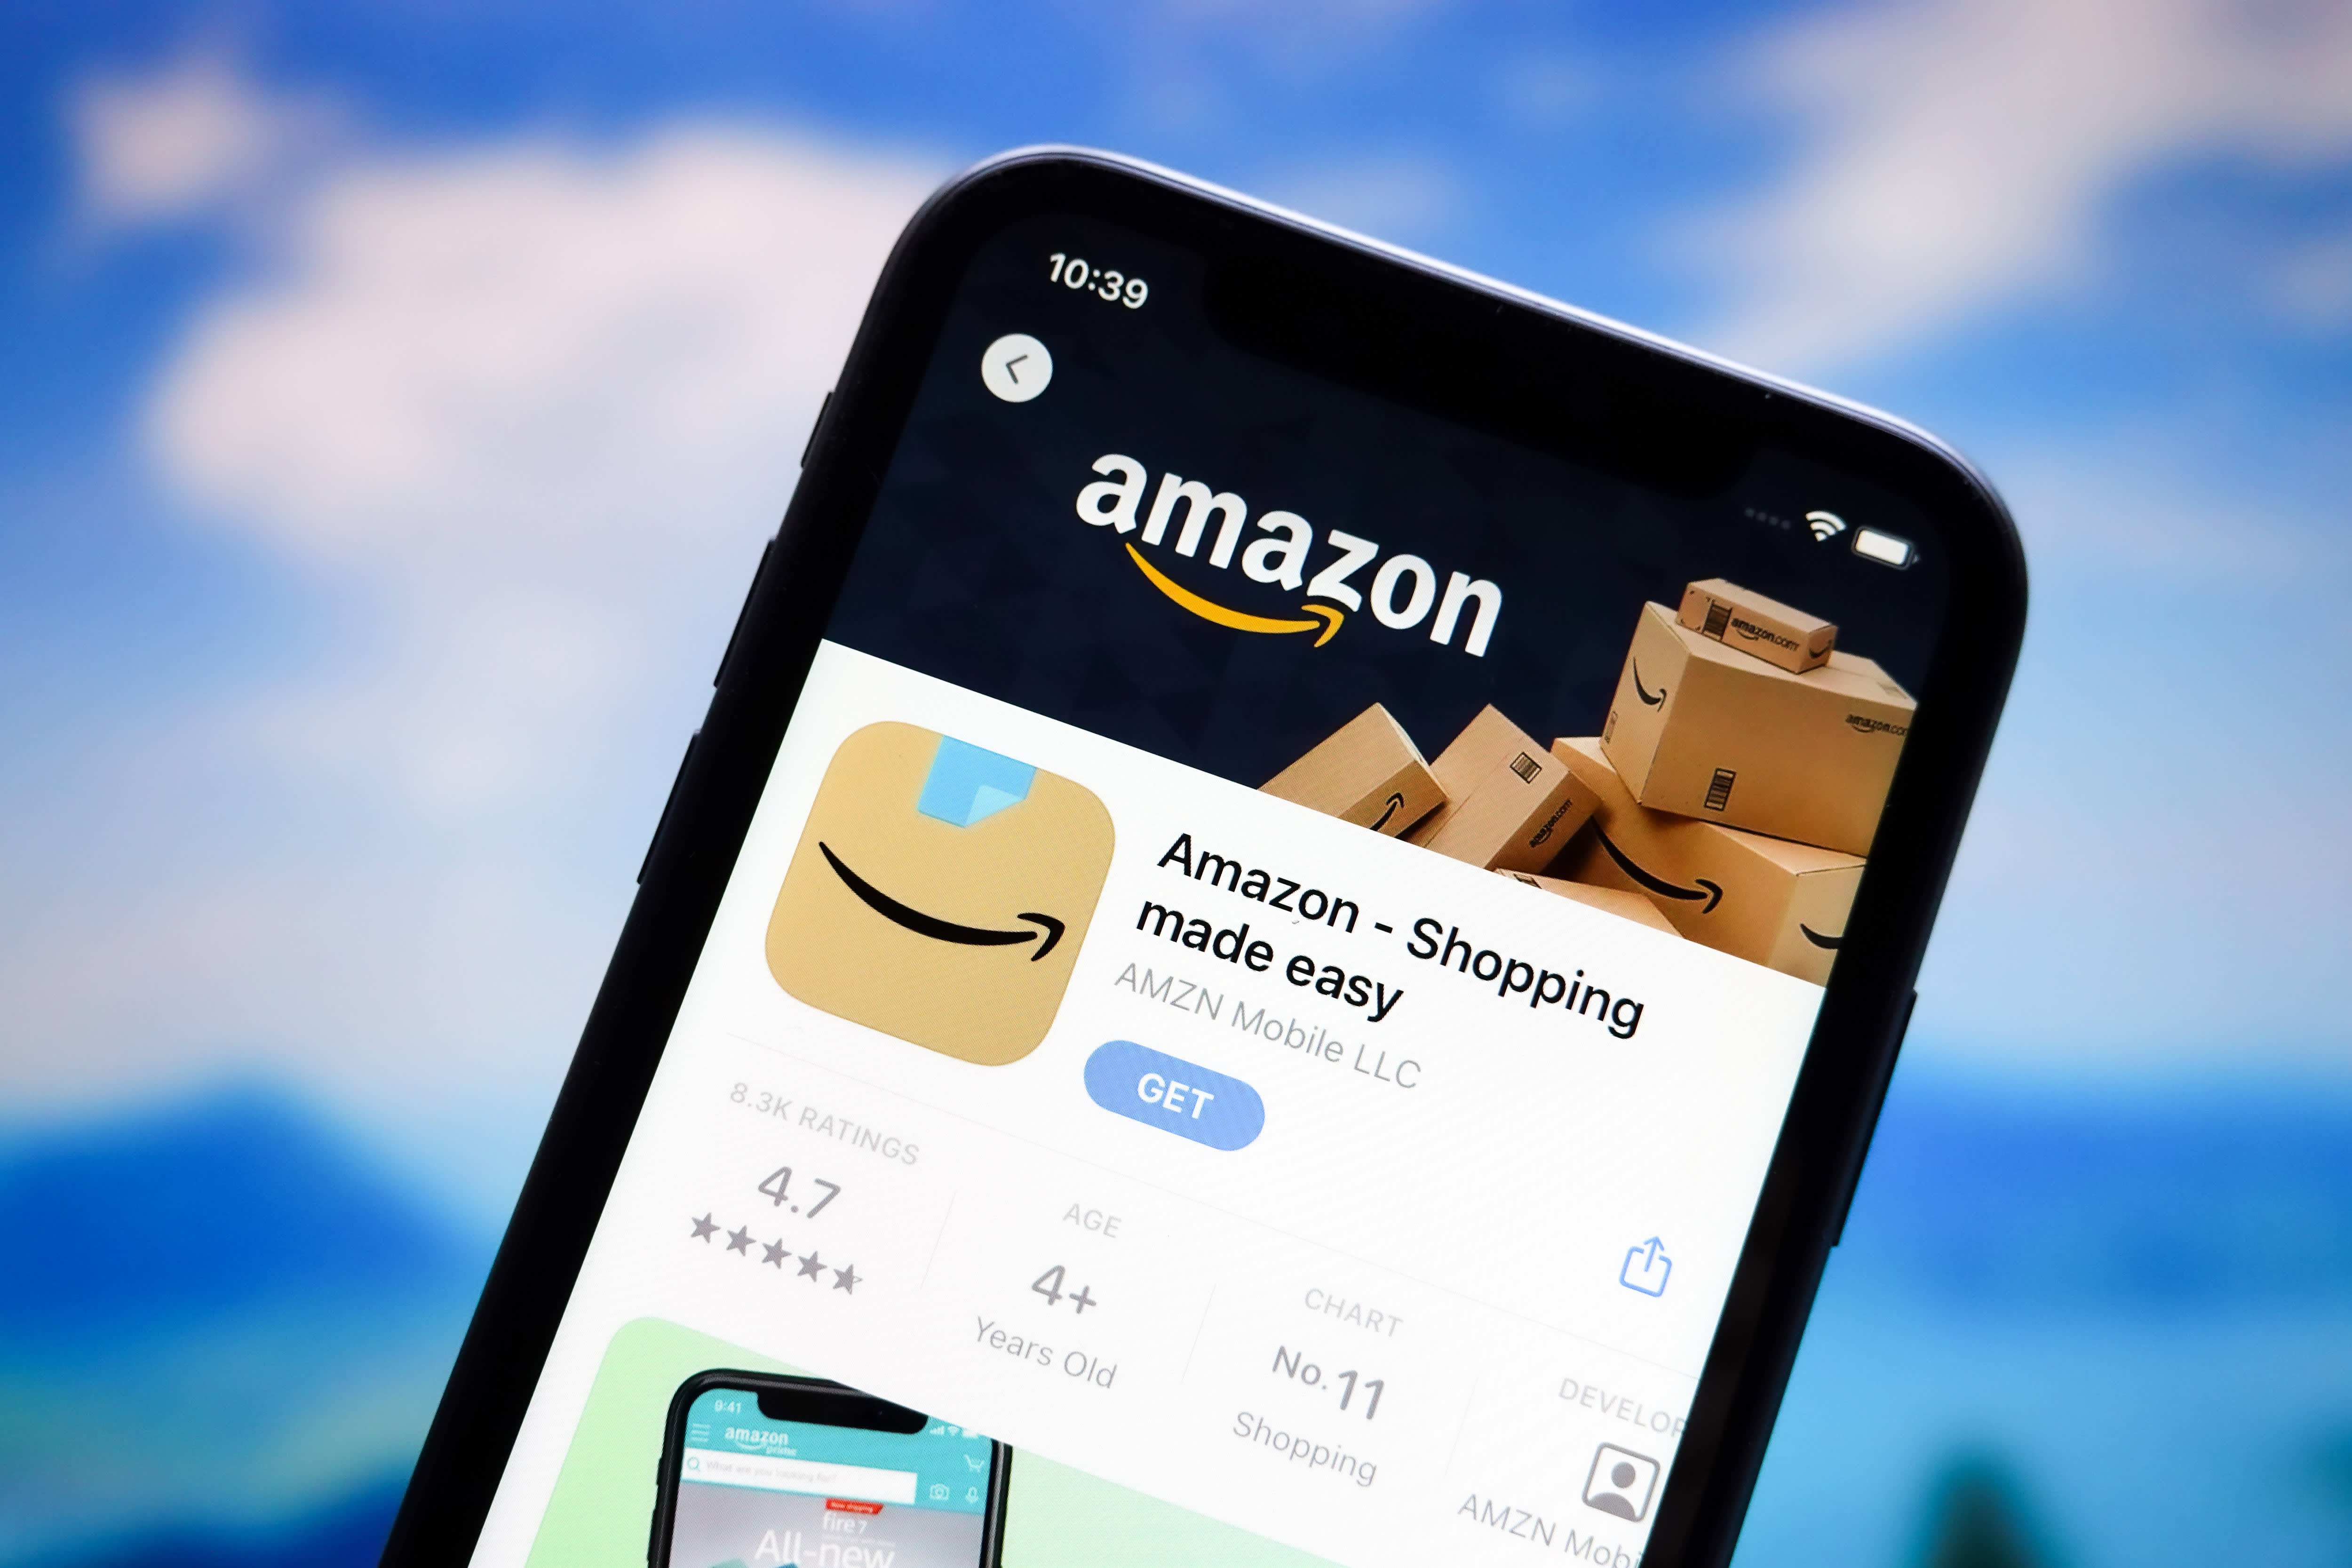 Amazon customers have reported incorrect email confirmations for gift cards